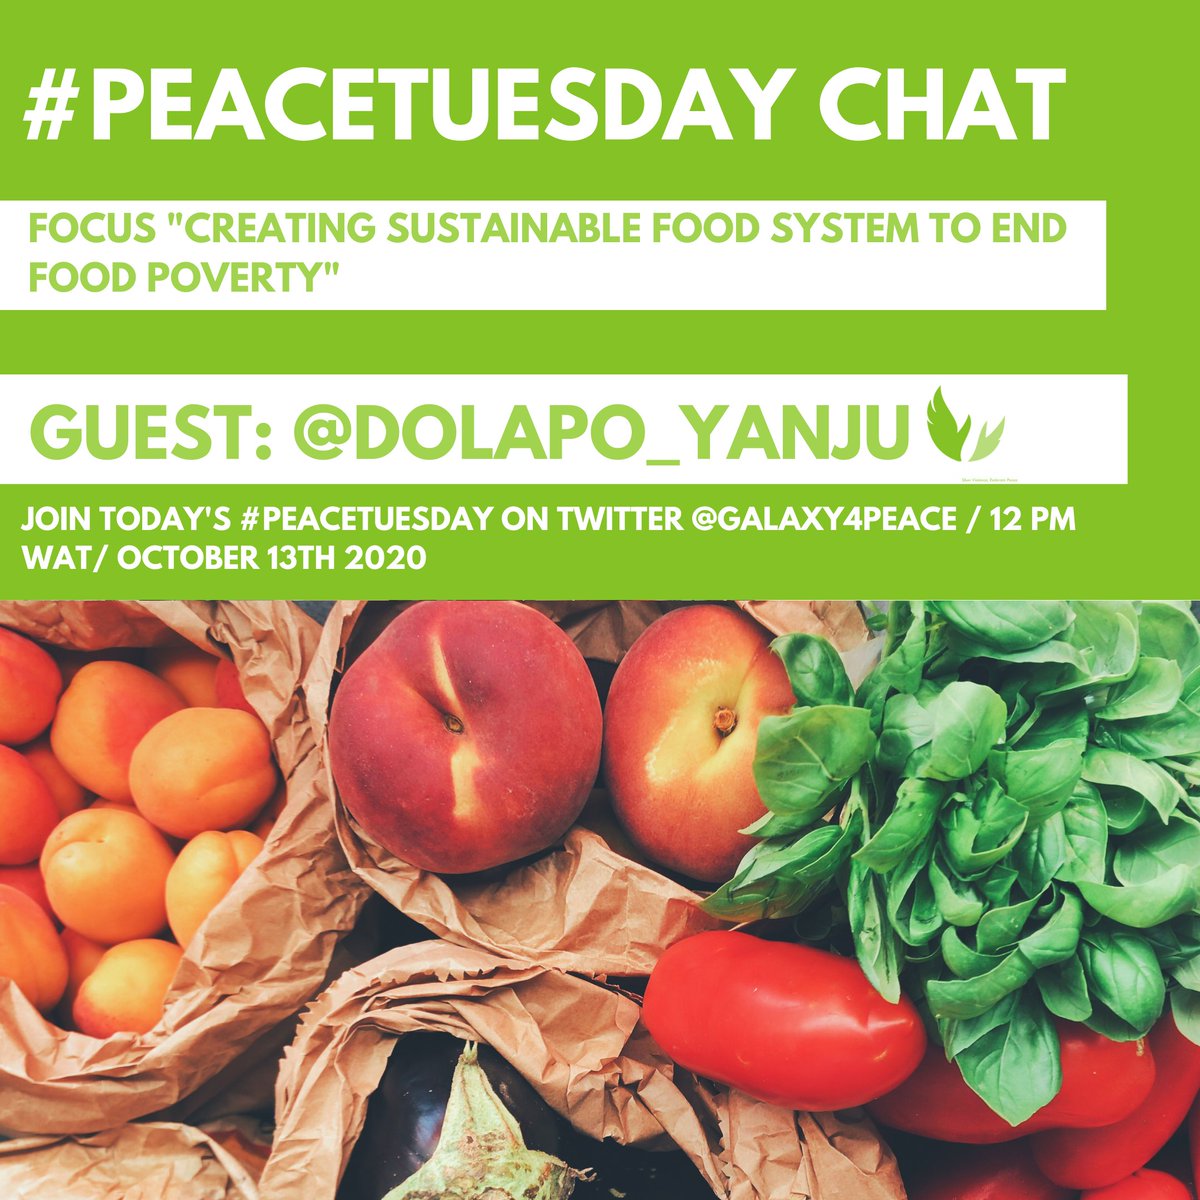 Behind every plate of food, there is a bitter-sweet sweat of a farmer. 
Today as we celebrate these heroes, I'll be chatting with @galaxy4peace on how to eradicate #FoodPoverty and create a #SustainableFoodSystem. Kindly join the conversation at 12pm WAT using #PeaceTuesday